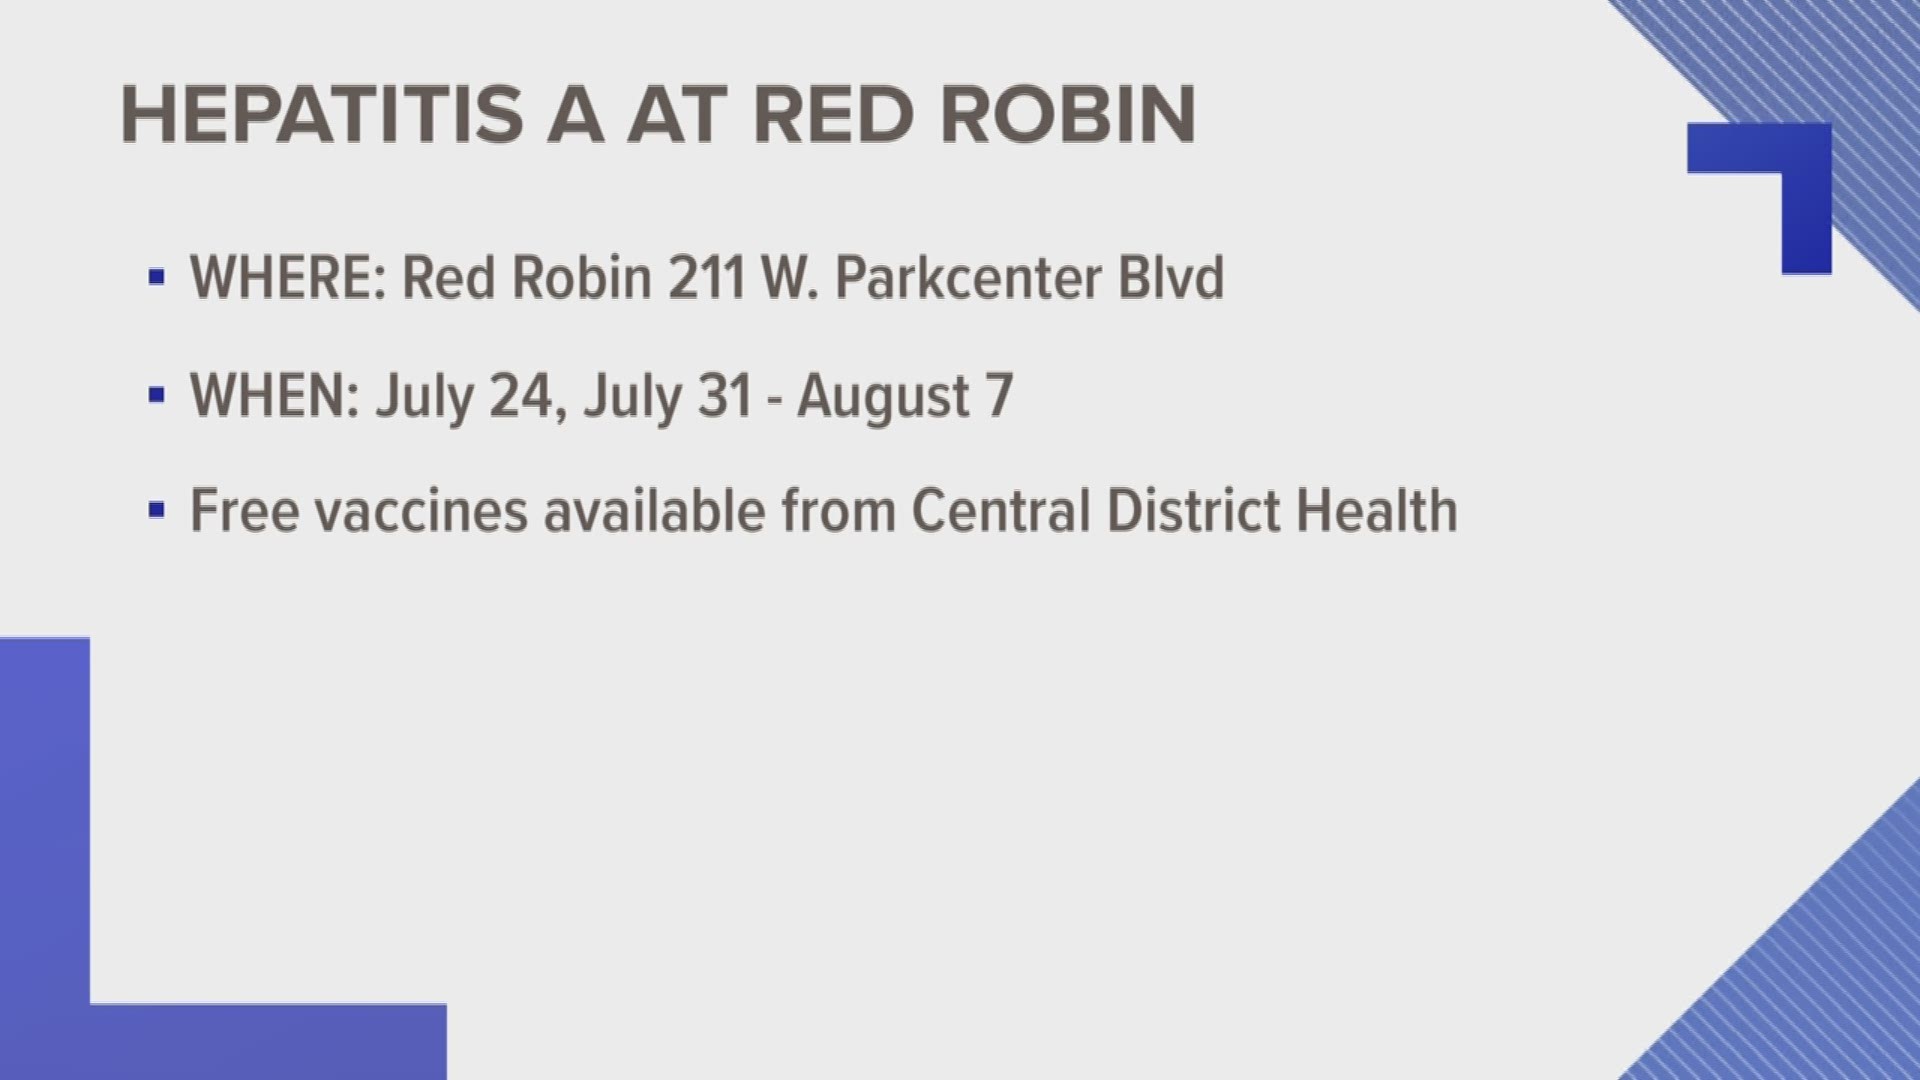 The Central District Health Department has confirmed a case of Hepatitis A in a food service worker at the Red Robin located at 211 W. Parkcenter Boulevard in Boise. Health officials say the worker is the only Hepatitis A case in Idaho linked to the restaurant and that the employee worked during the time that they were contagious.